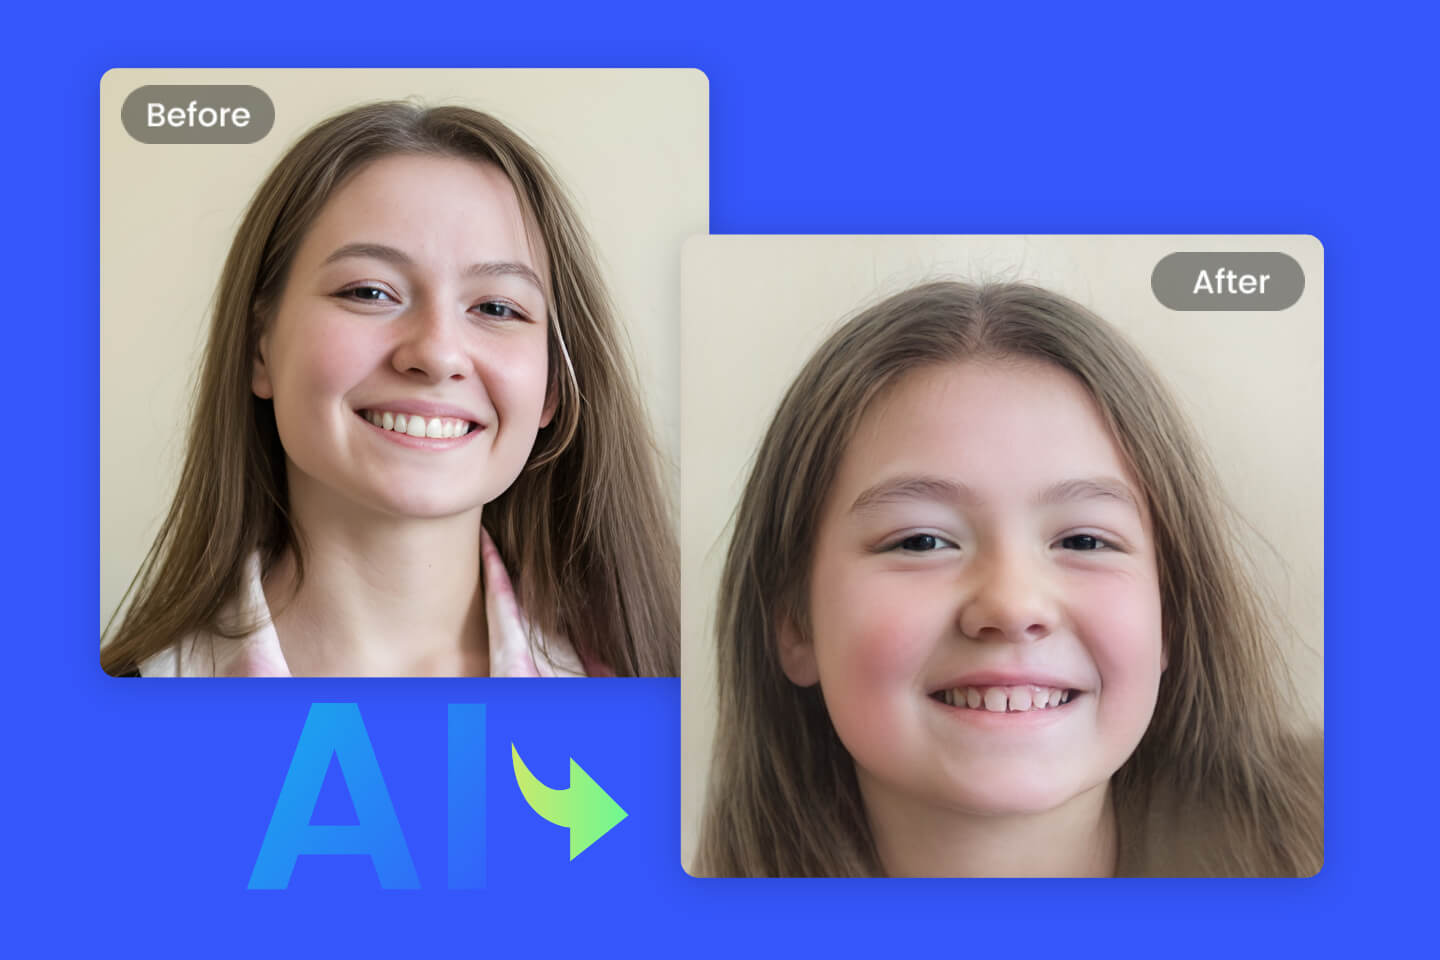 Baby Filter: Turn Your Photo to Baby Face with AI | Fotor